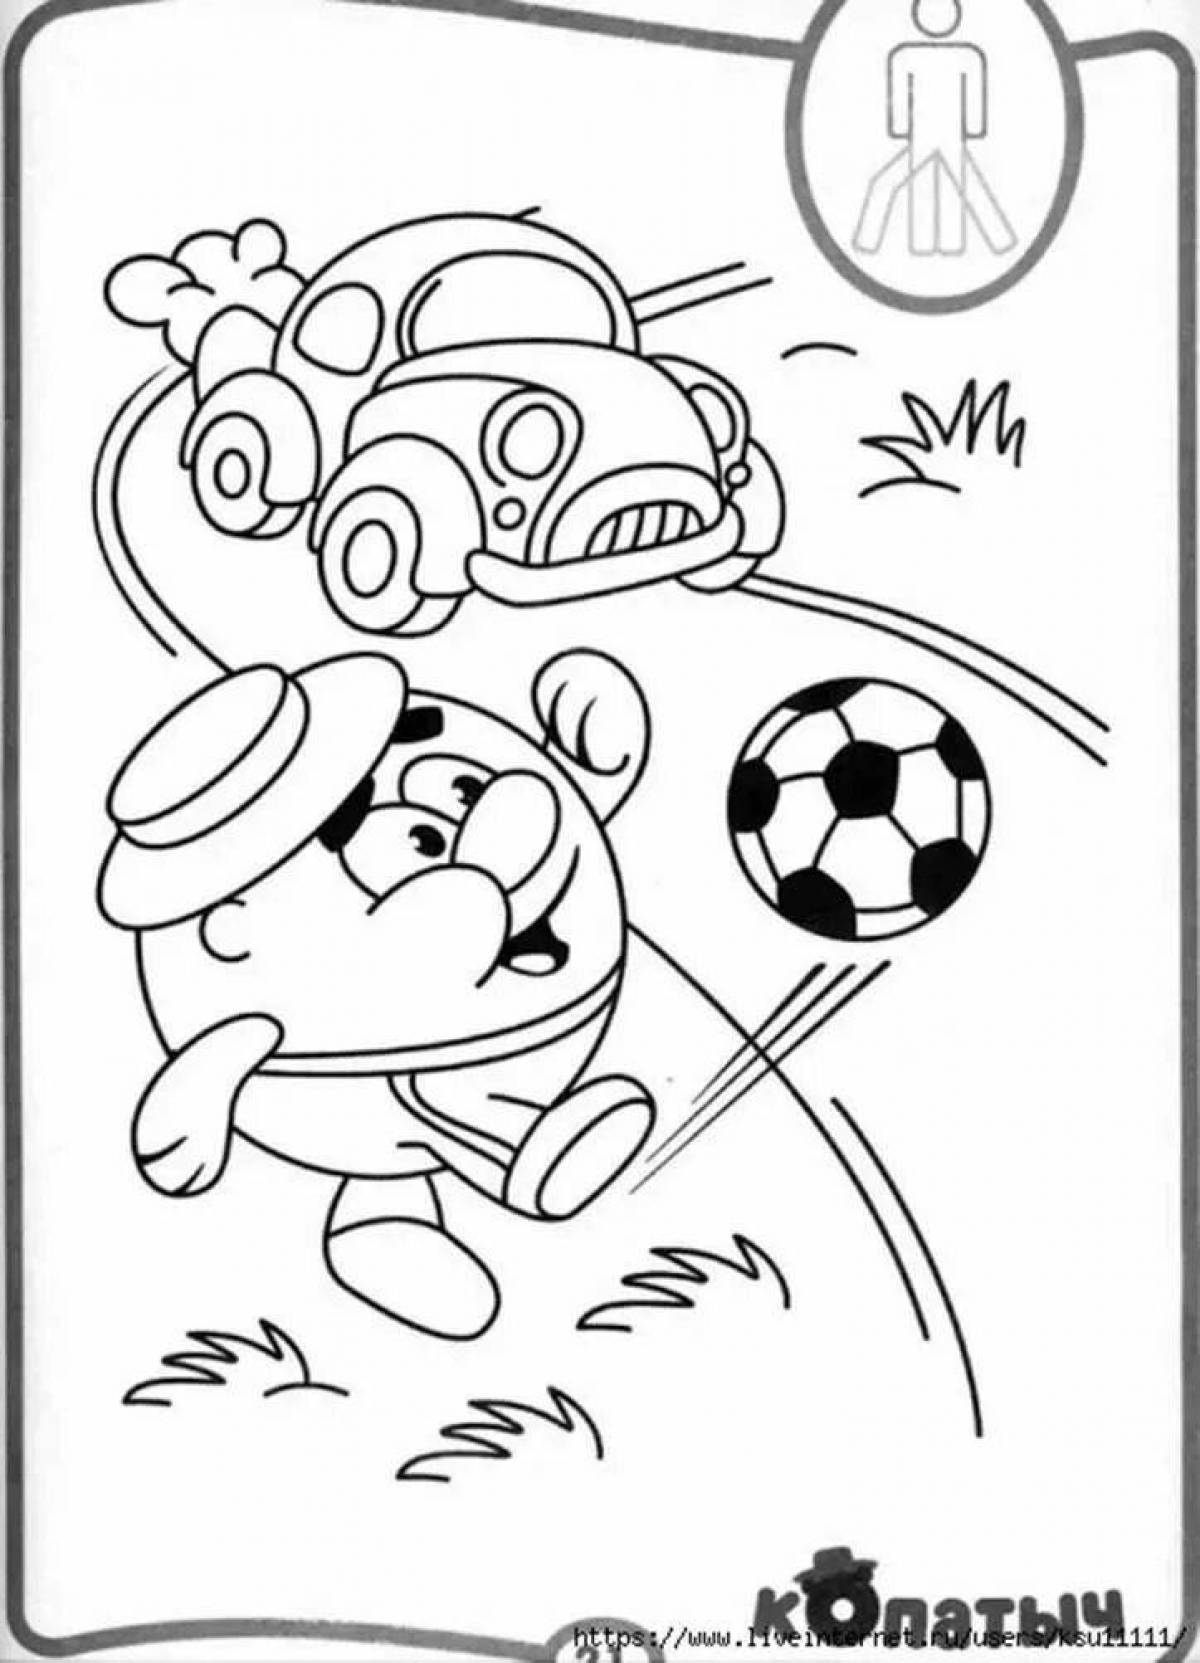 Creative safety coloring book for preschoolers